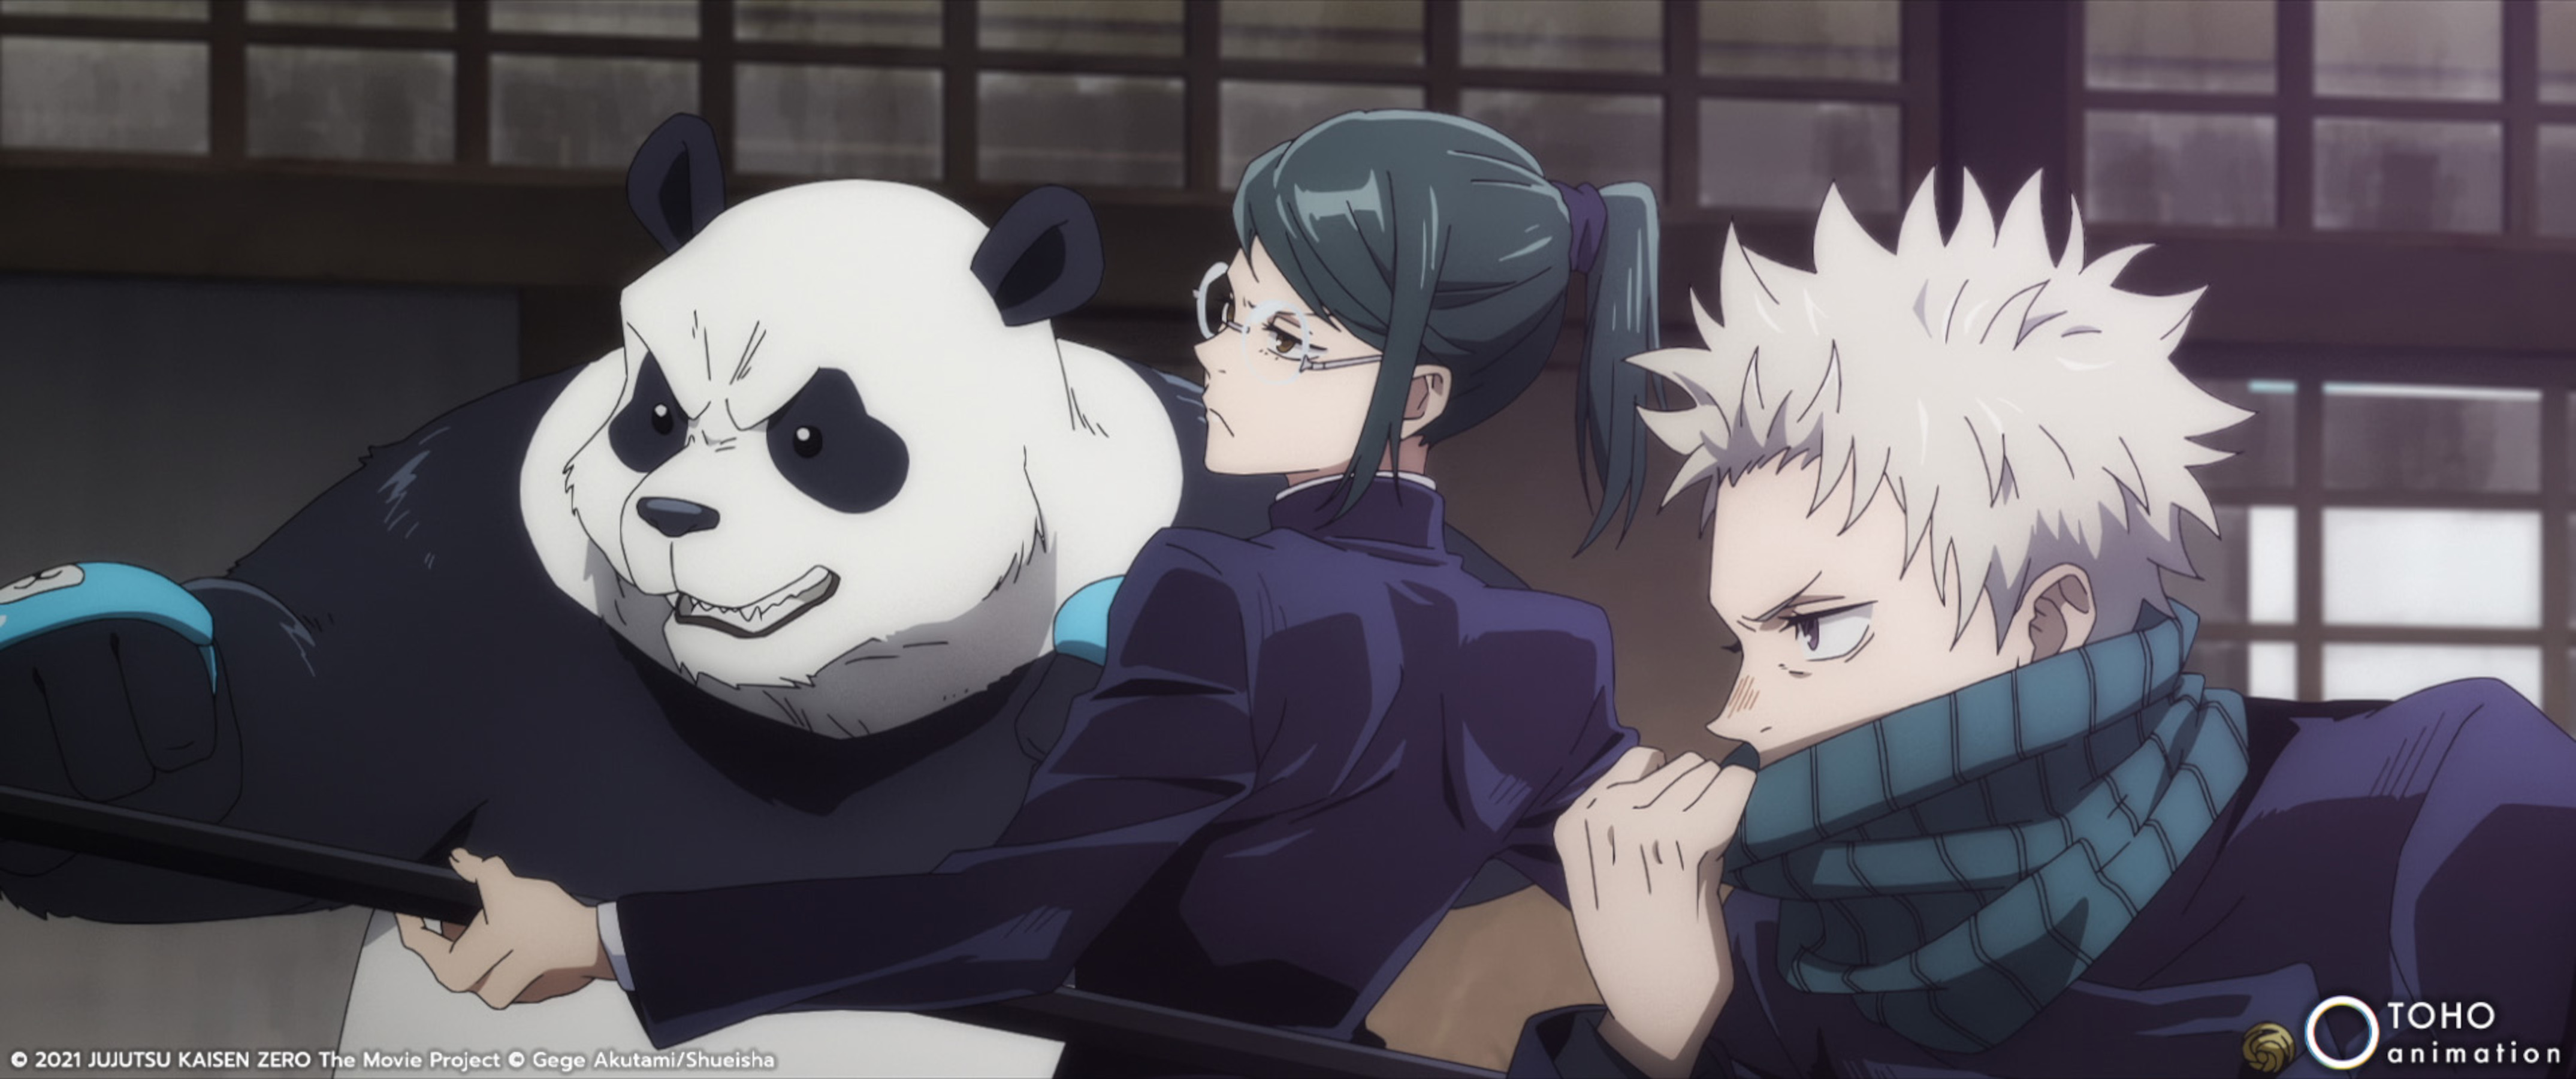 Panda, Maki, and Toge in 'Jujutsu Kaisen 0.' They're looking at someone off-screen and preparing to fight.